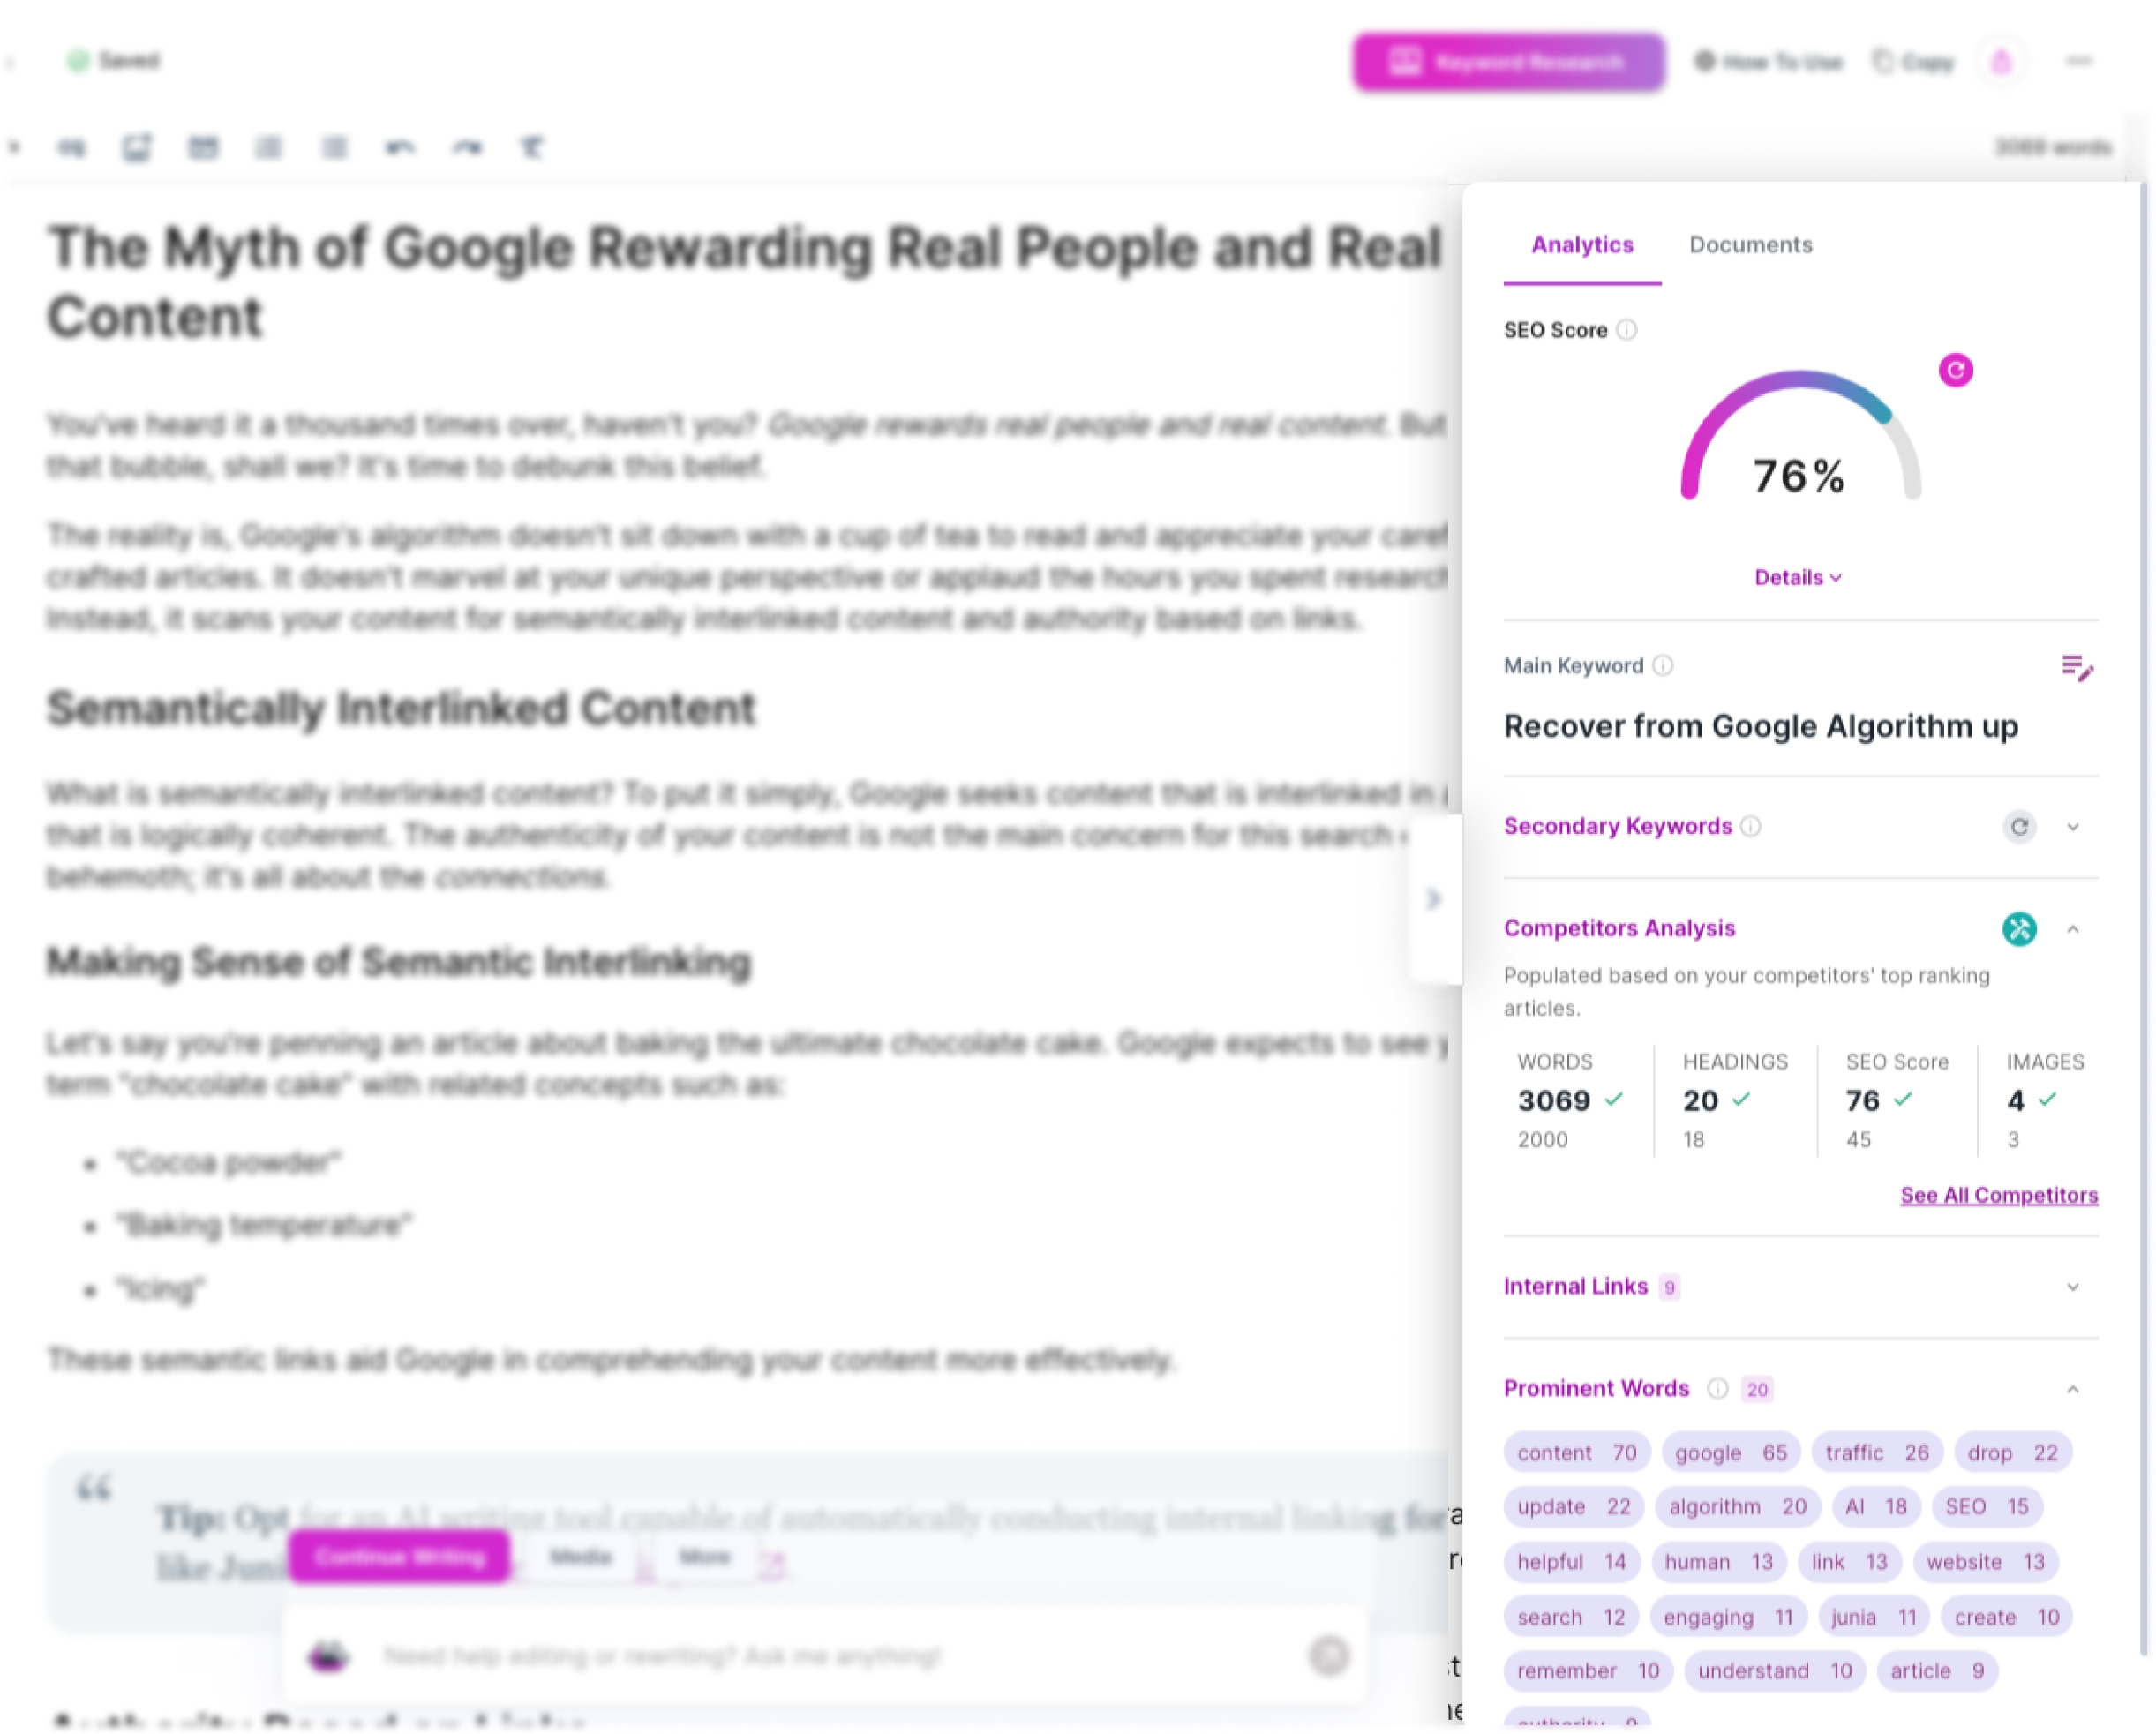 Junia AI auditing article for seo improvement in real time.